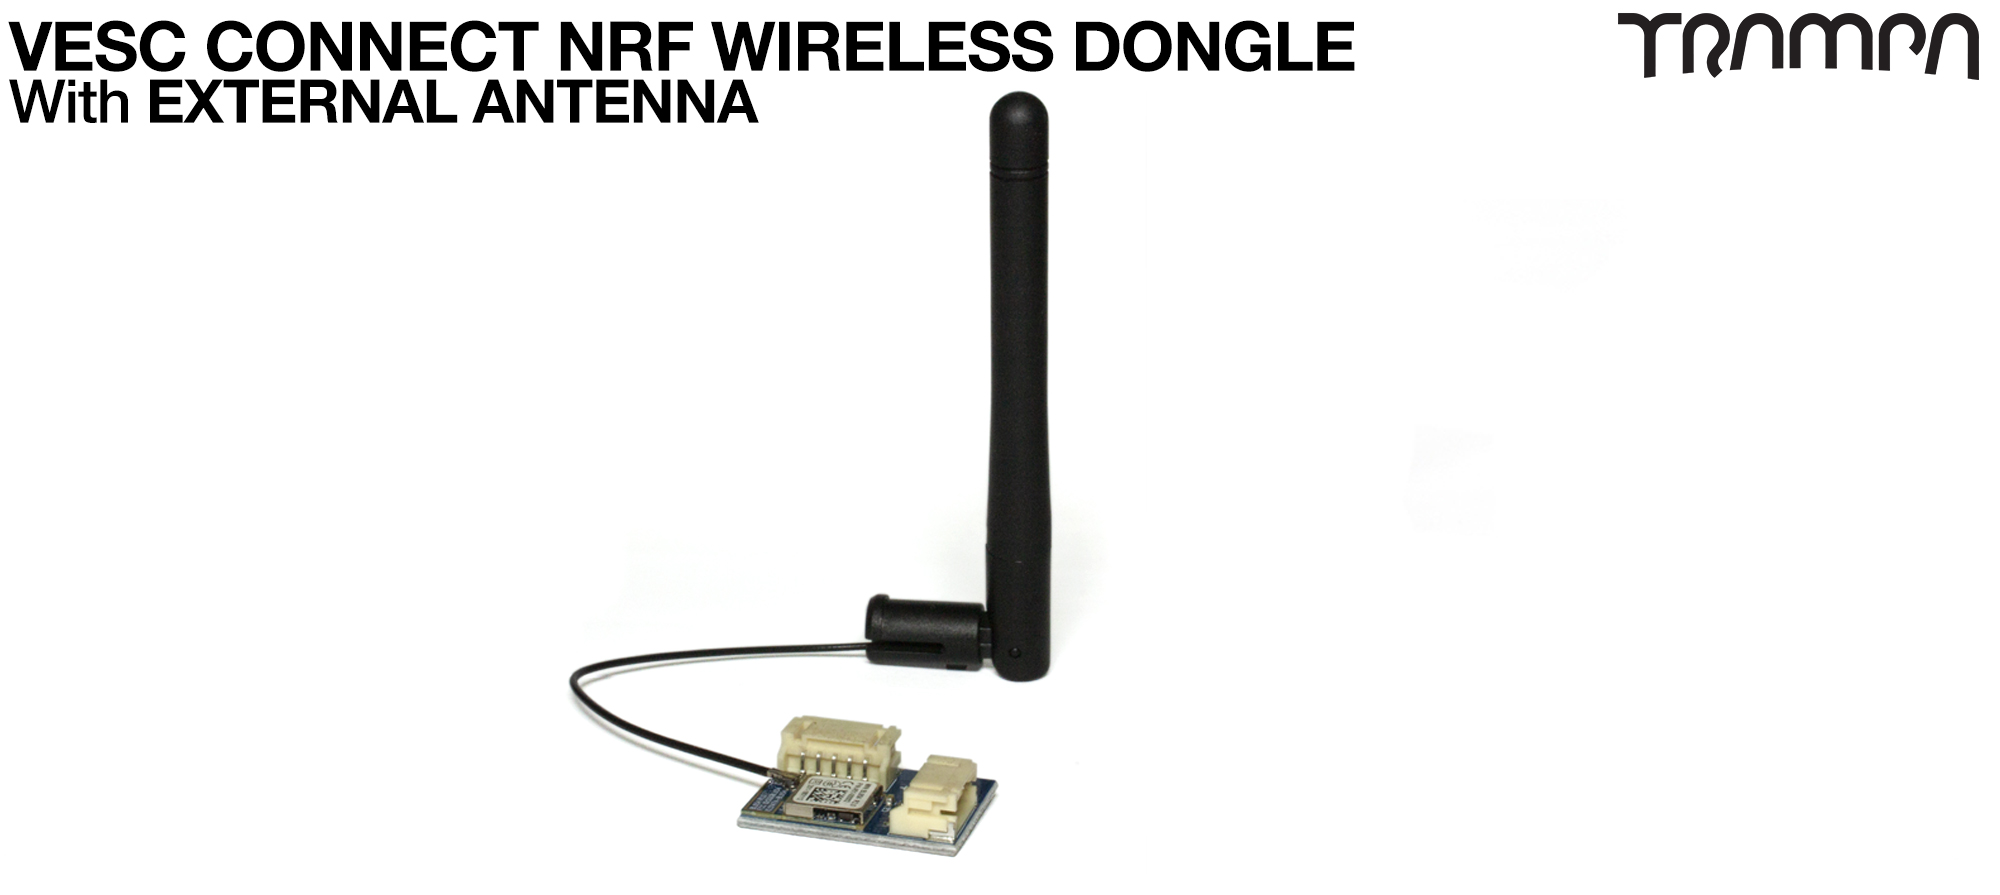 EXTERNAL ARIAL NRF VESC Connect Dongle (+£35)